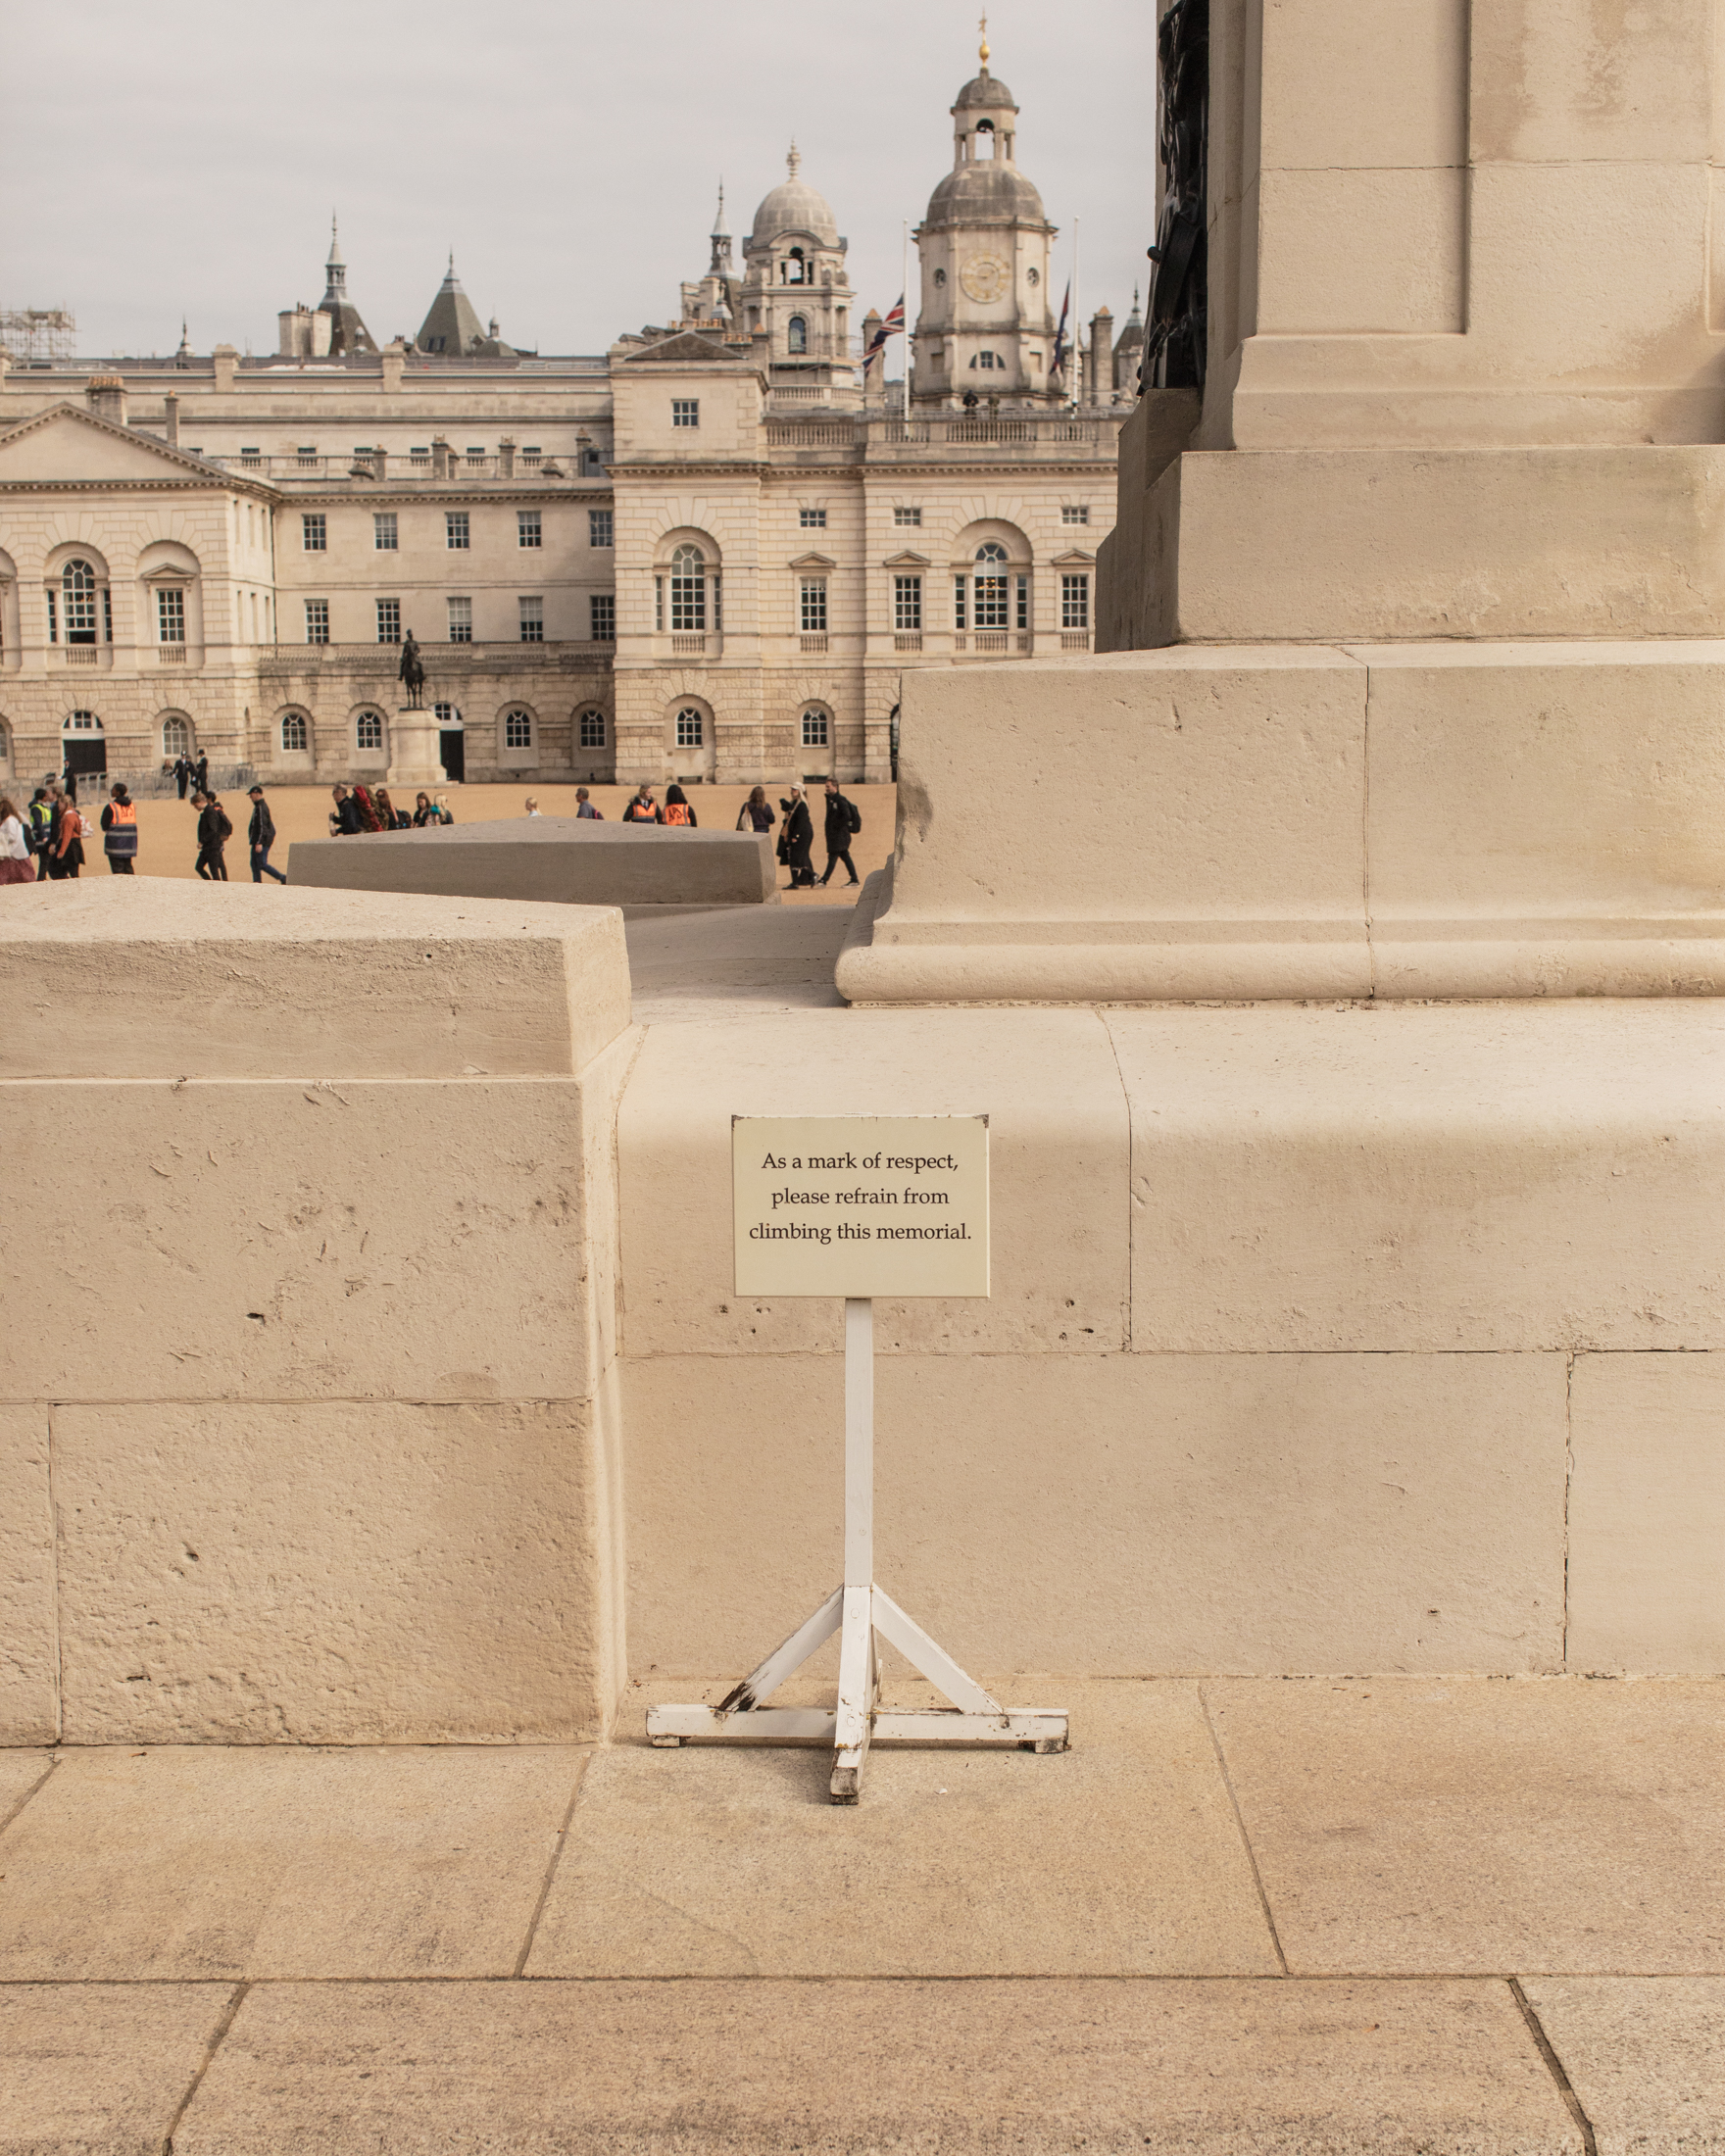 Sign warning people not to climb monument during Queen Elizabeth II's funeral